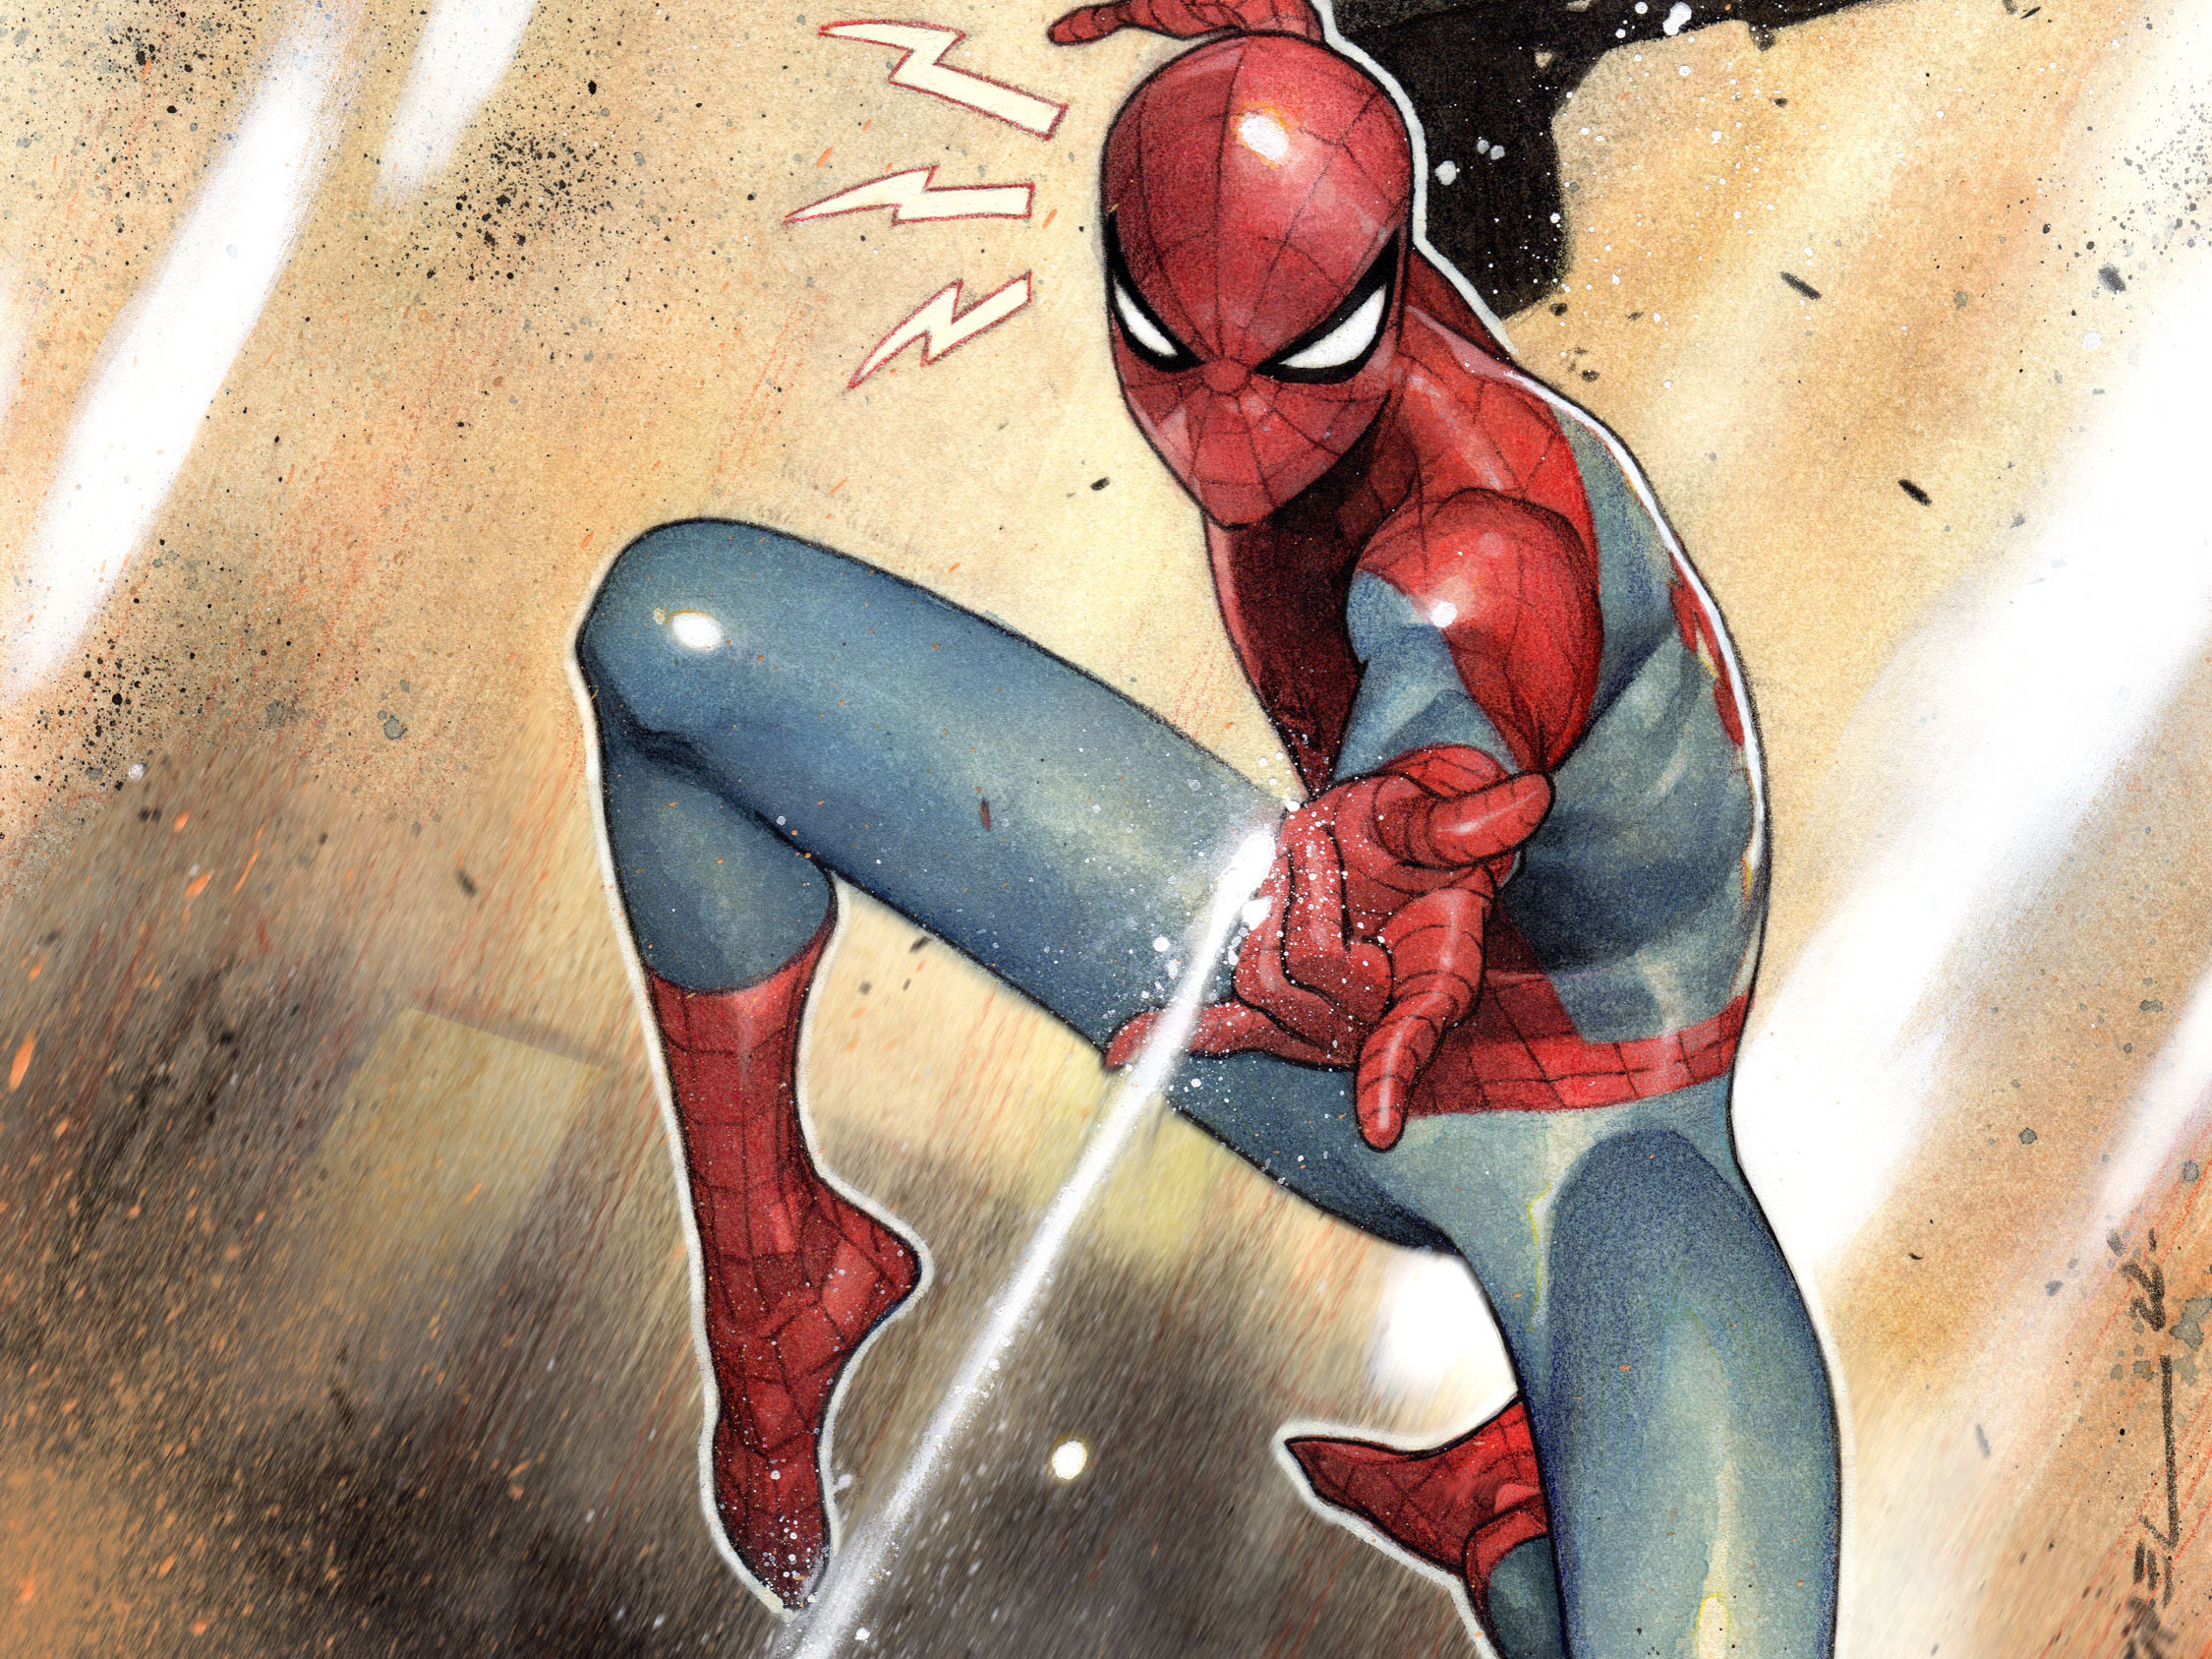 Marvel's 'Most shocking issue of Amazing Spider-Man in 50 years' gets new variant cover